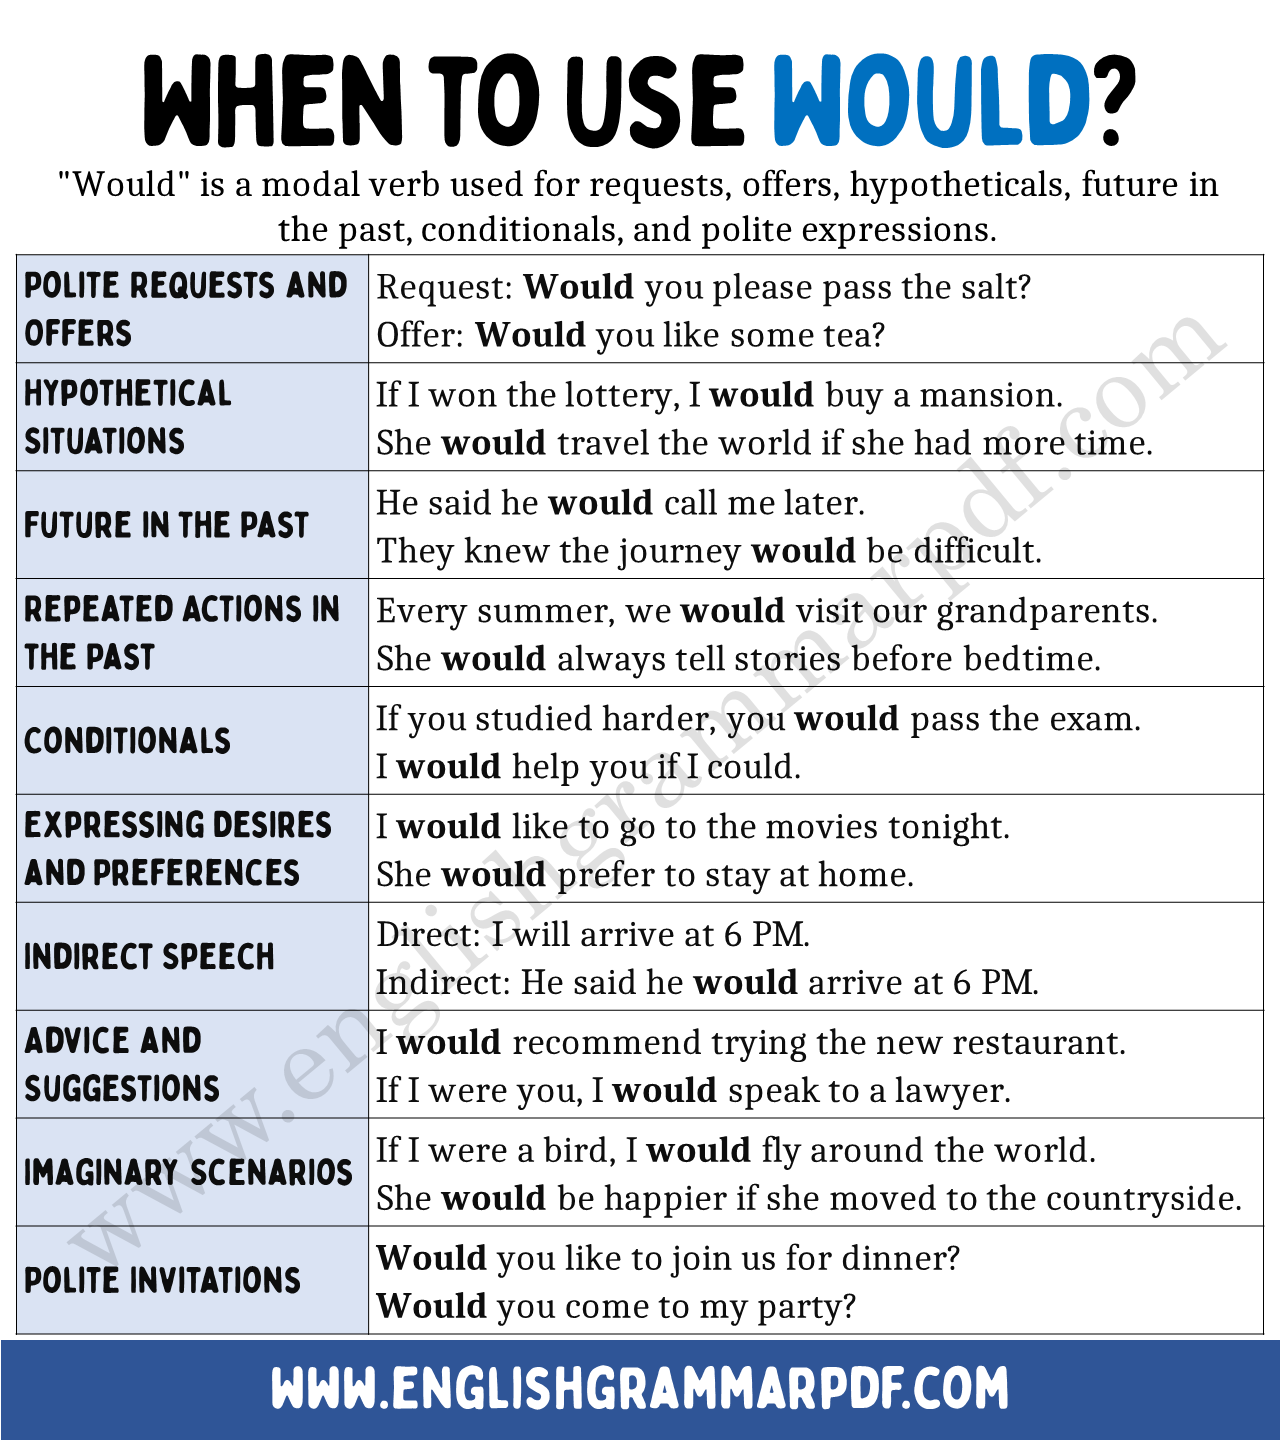 When to Use Would